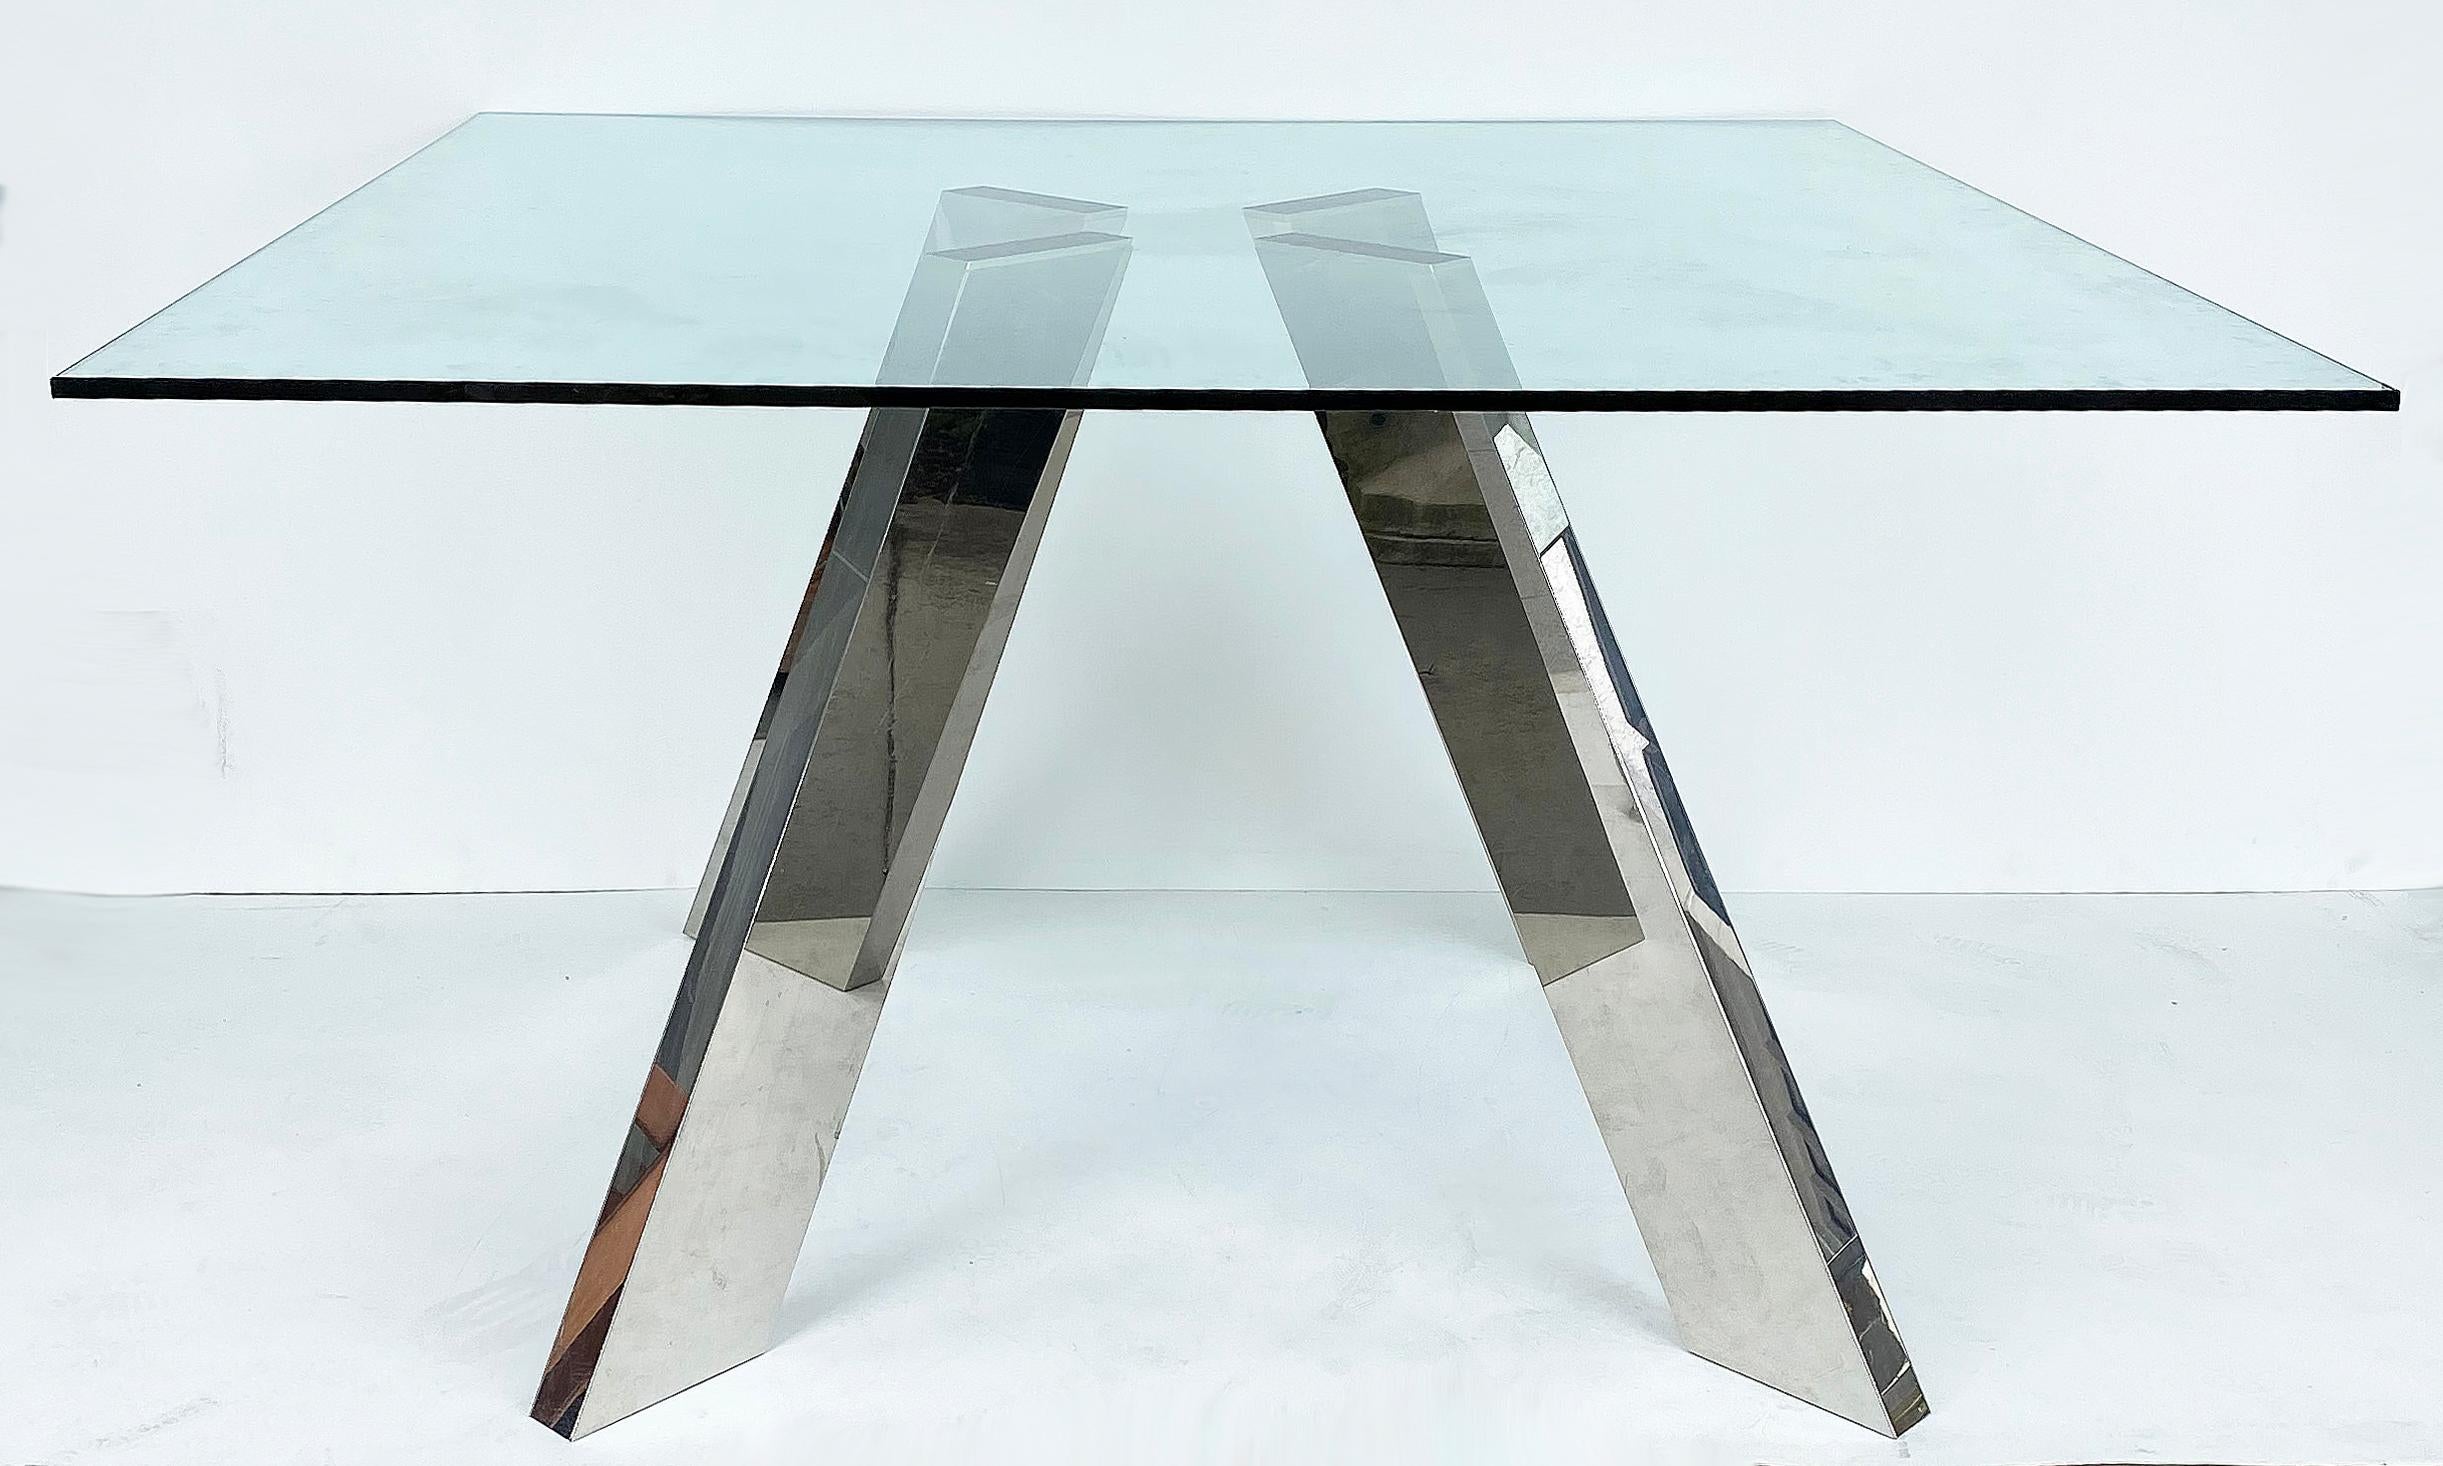 Modernist stainless steel and glass top table with splayed angular legs

Offered for sale is a modernist stainless steel and glass dining table with four individual angular legs that are splayed and support an affixed glass top that is .5